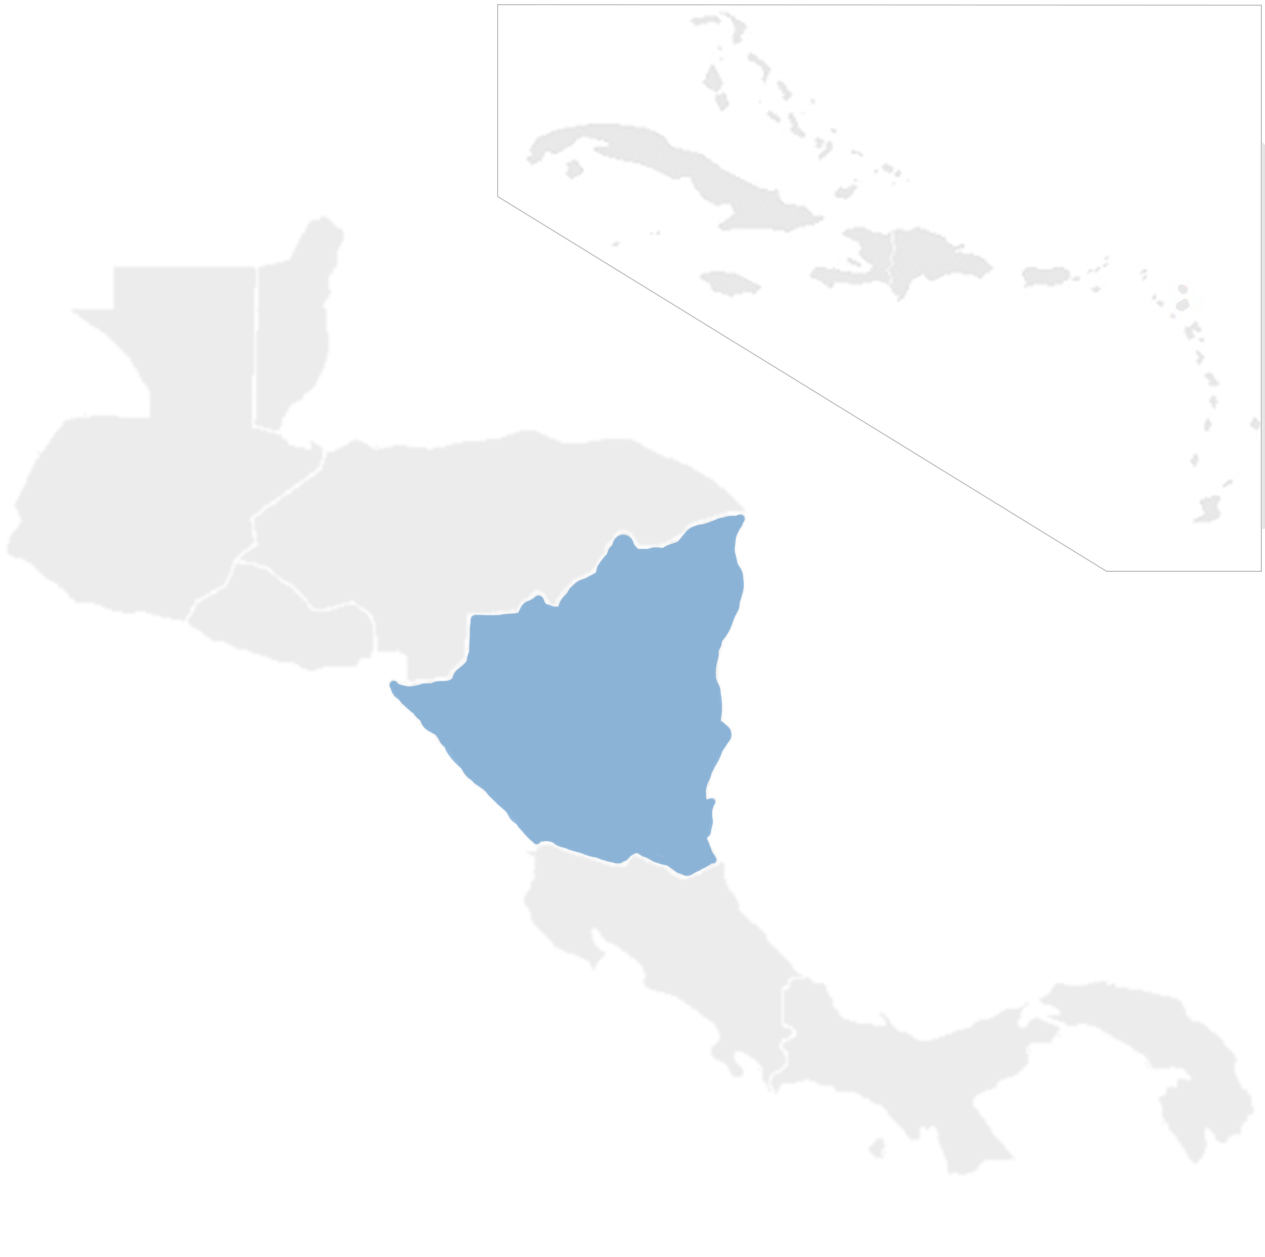 Gray map of Central America and the Caribbean with Nicaragua in blue